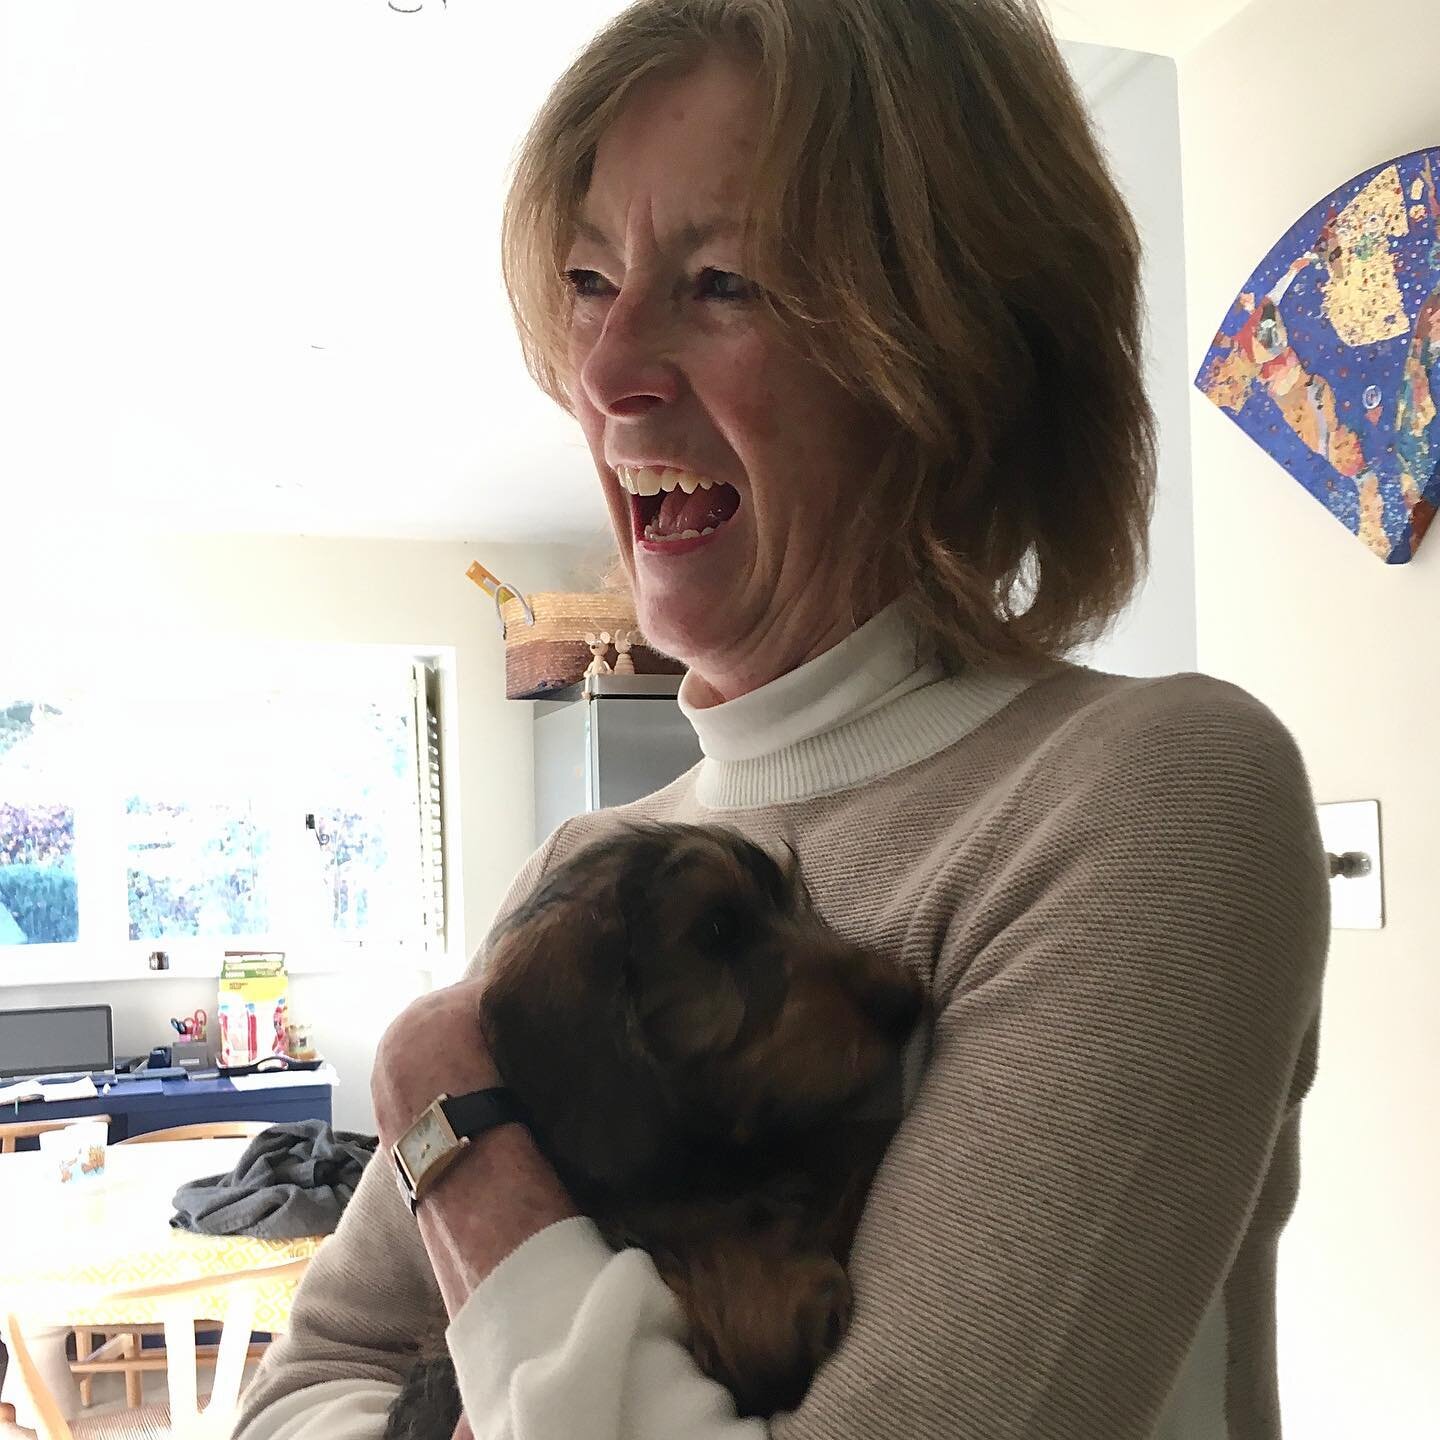 Cuddles on the job! Strudel the dachshund puppy @nookandcook #perksofthejob